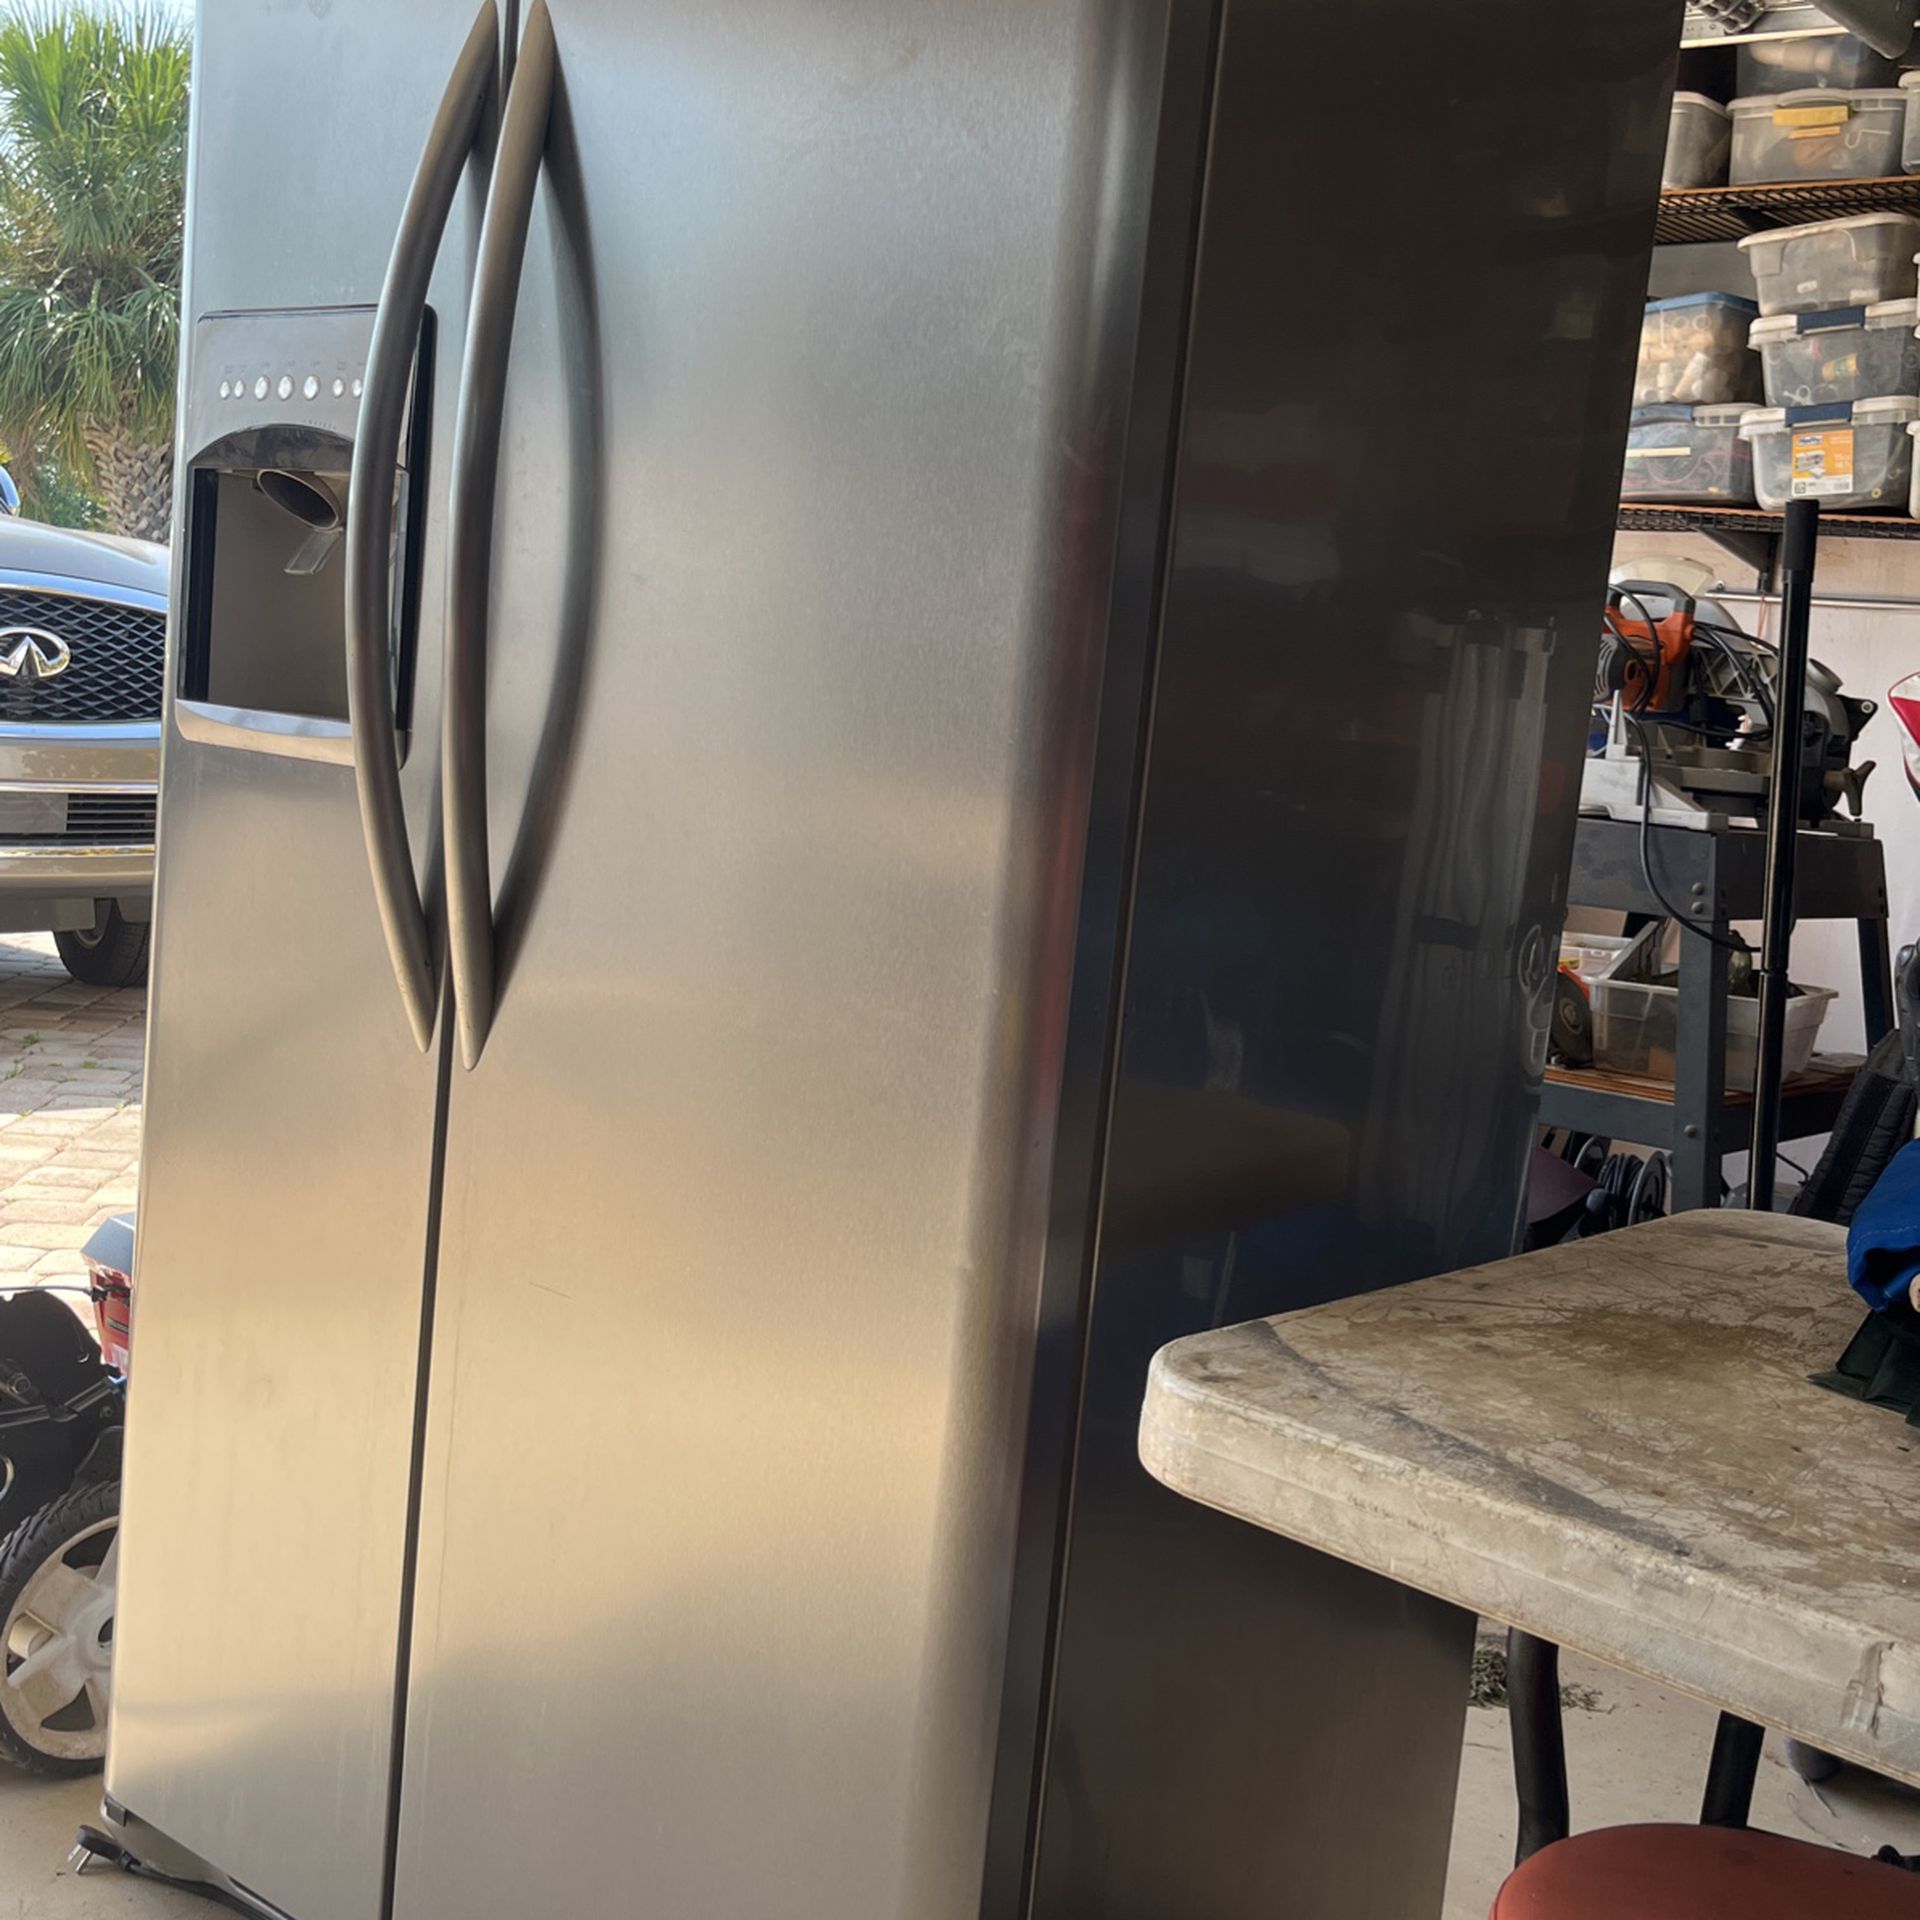 Counter Depth Frigidaire Refrigerator for Sale in Palm Shores, FL - OfferUp